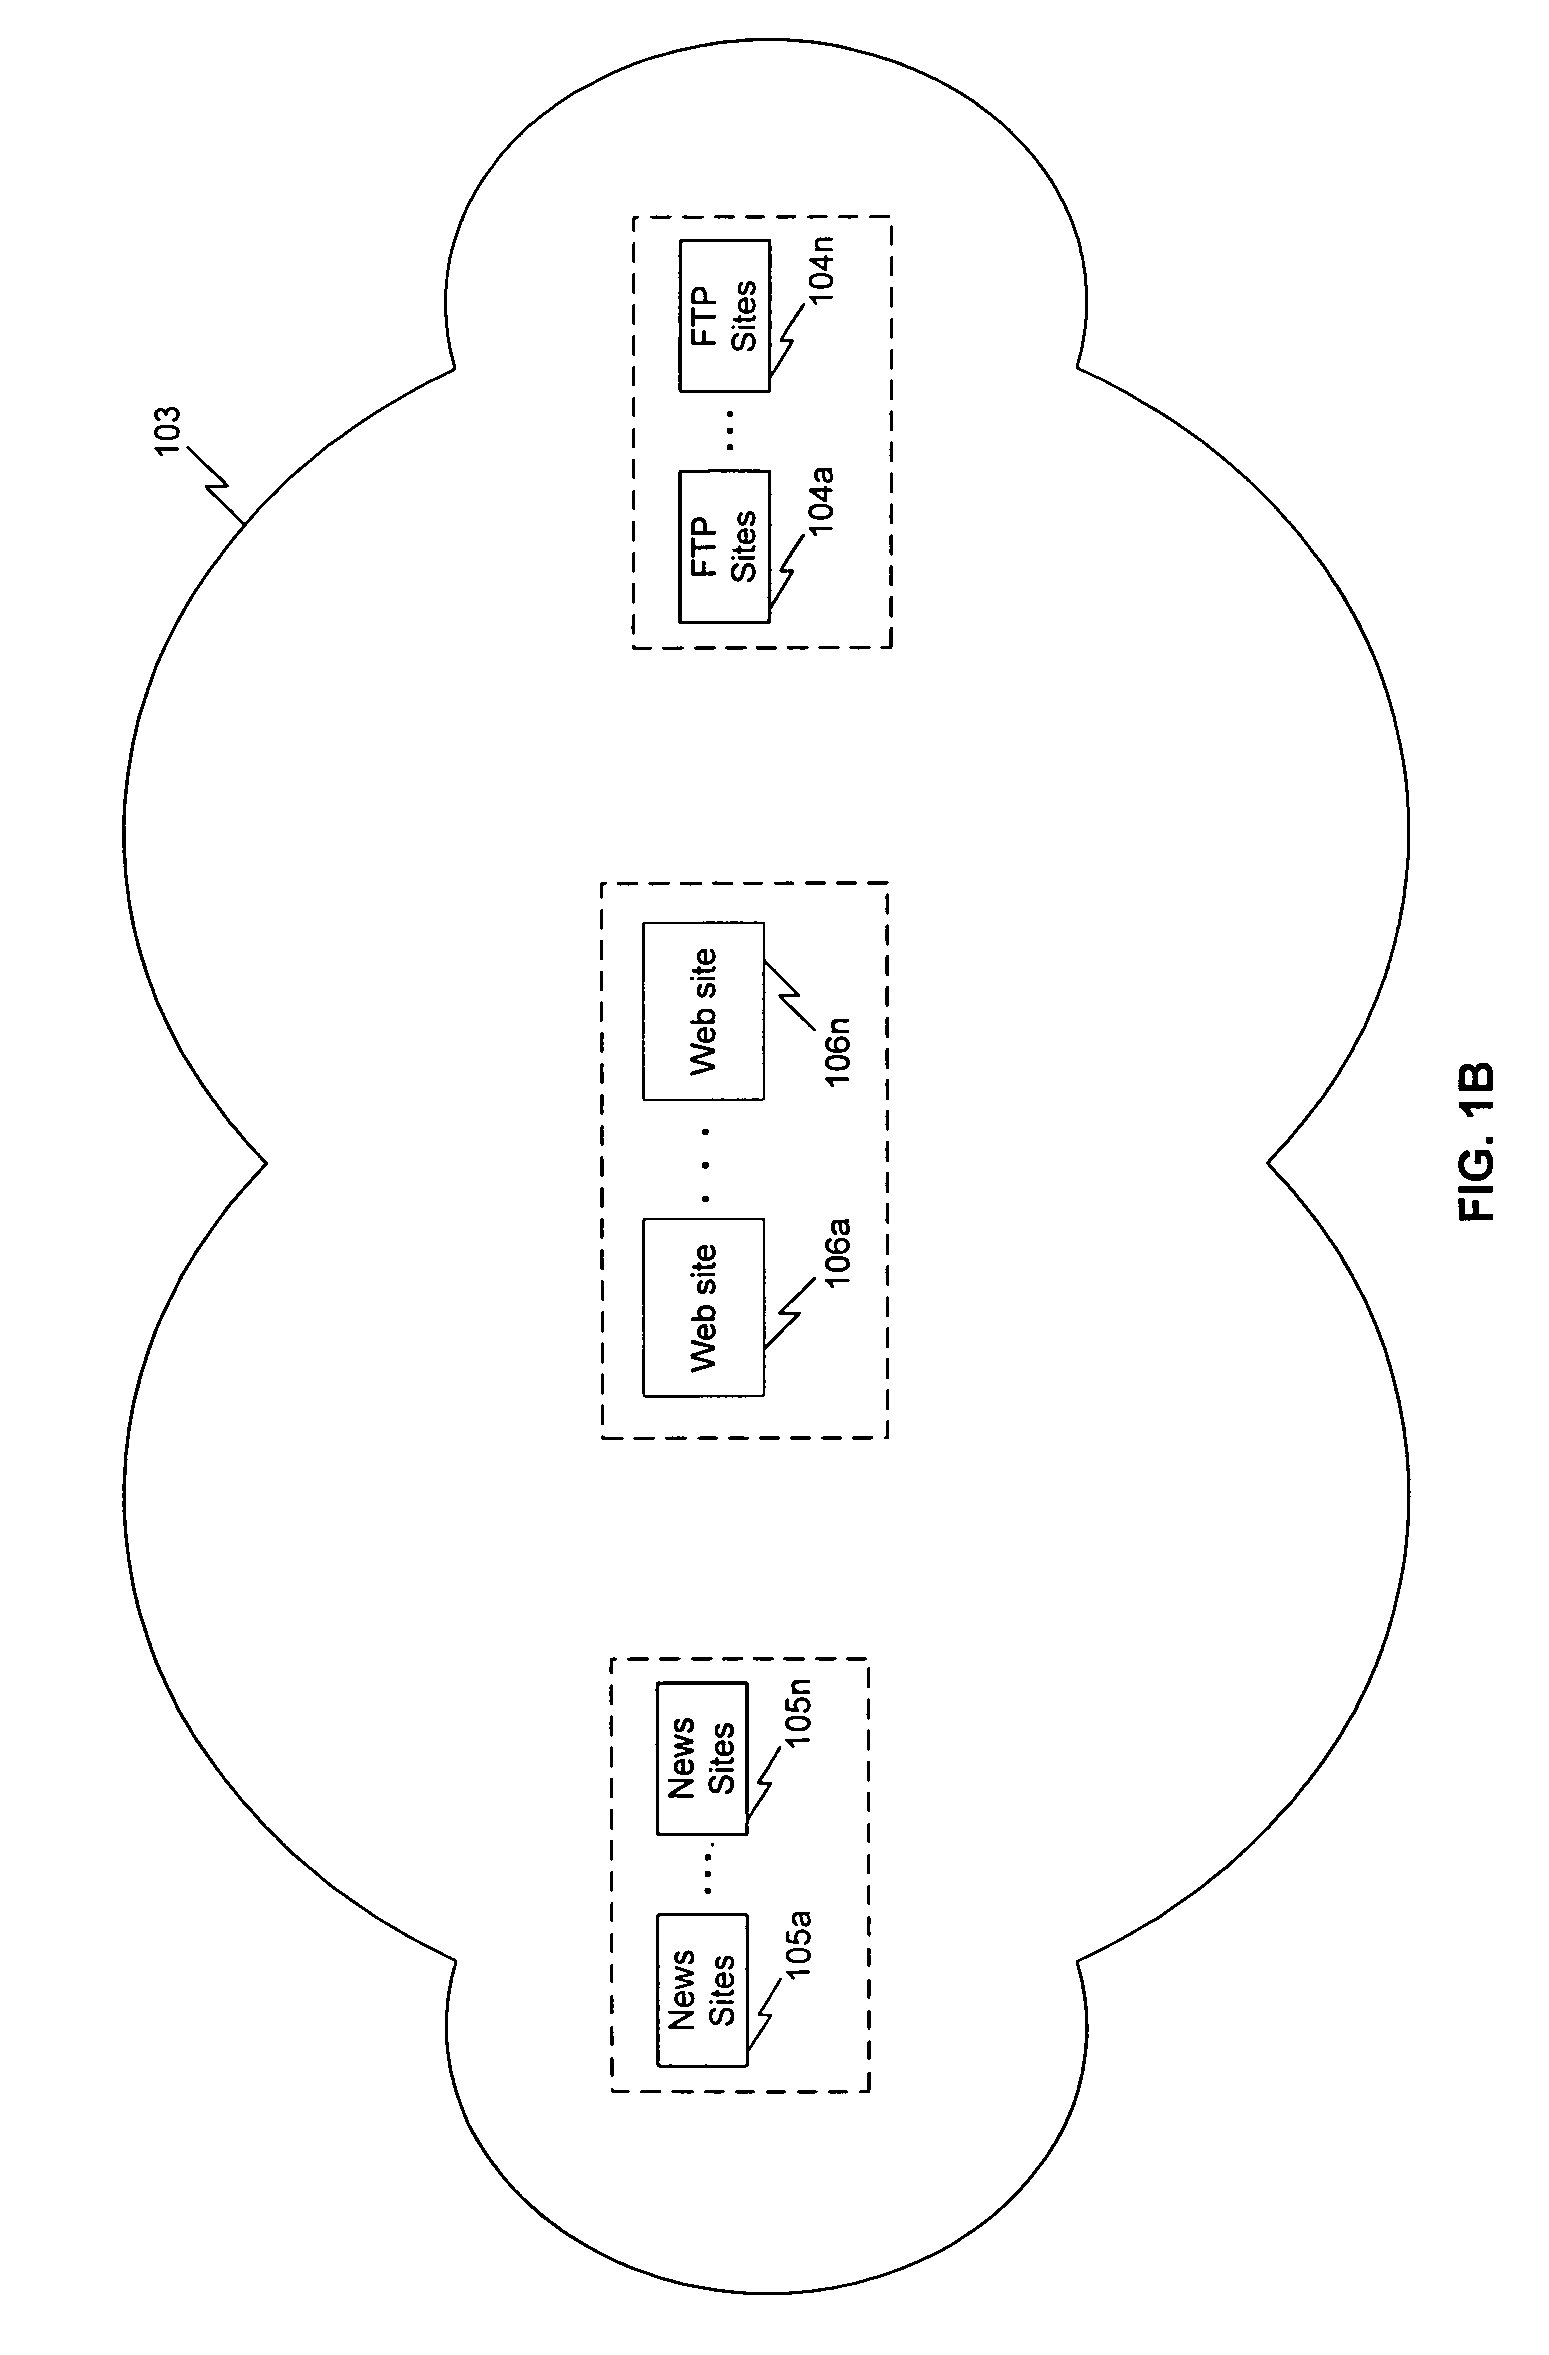 System, method and computer program product for analyzing e-commerce competition of an entity by utilizing predetermined entity-specific metrics and analyzed statistics from web pages